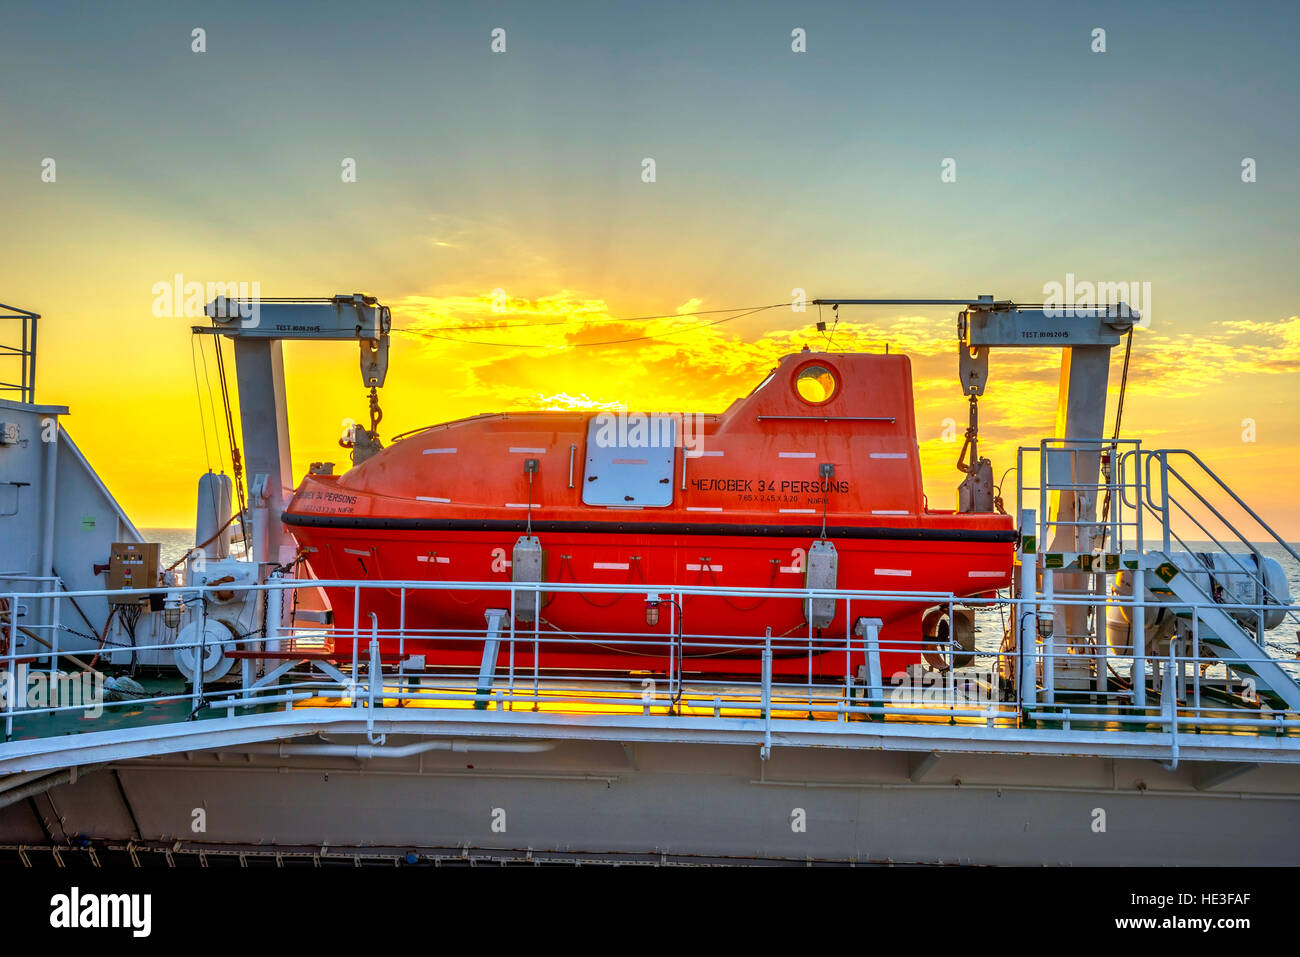 Orange rescue boat on the cargo vessel at the sea in sunset Stock Photo